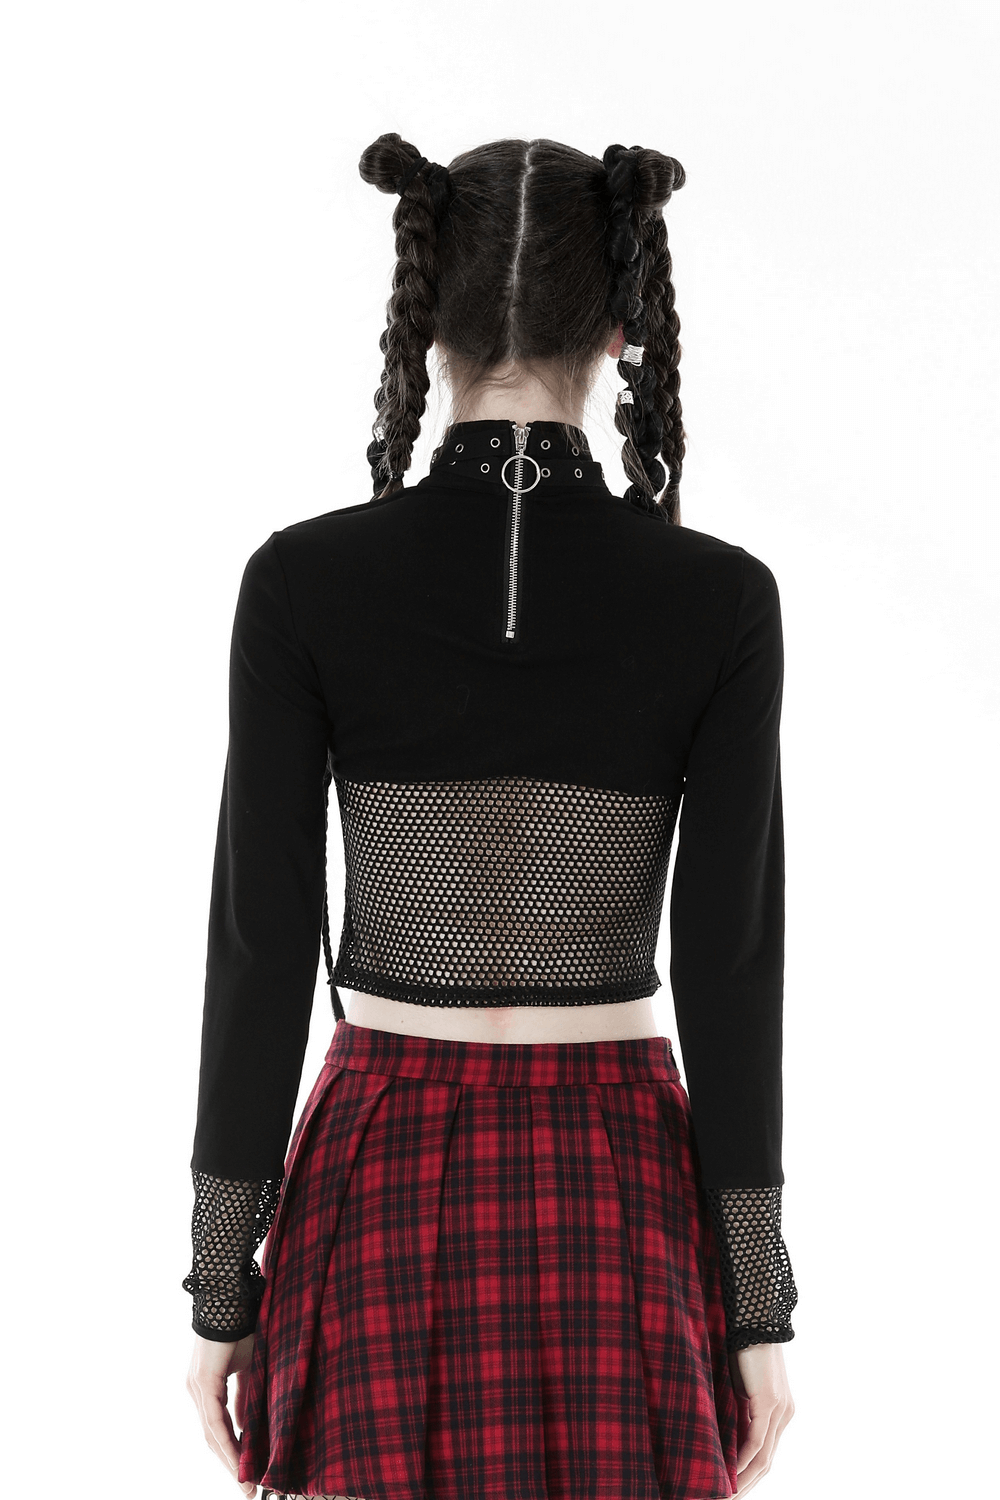 Stylish Black Crop Top with Edgy Cut-Outs and Studs